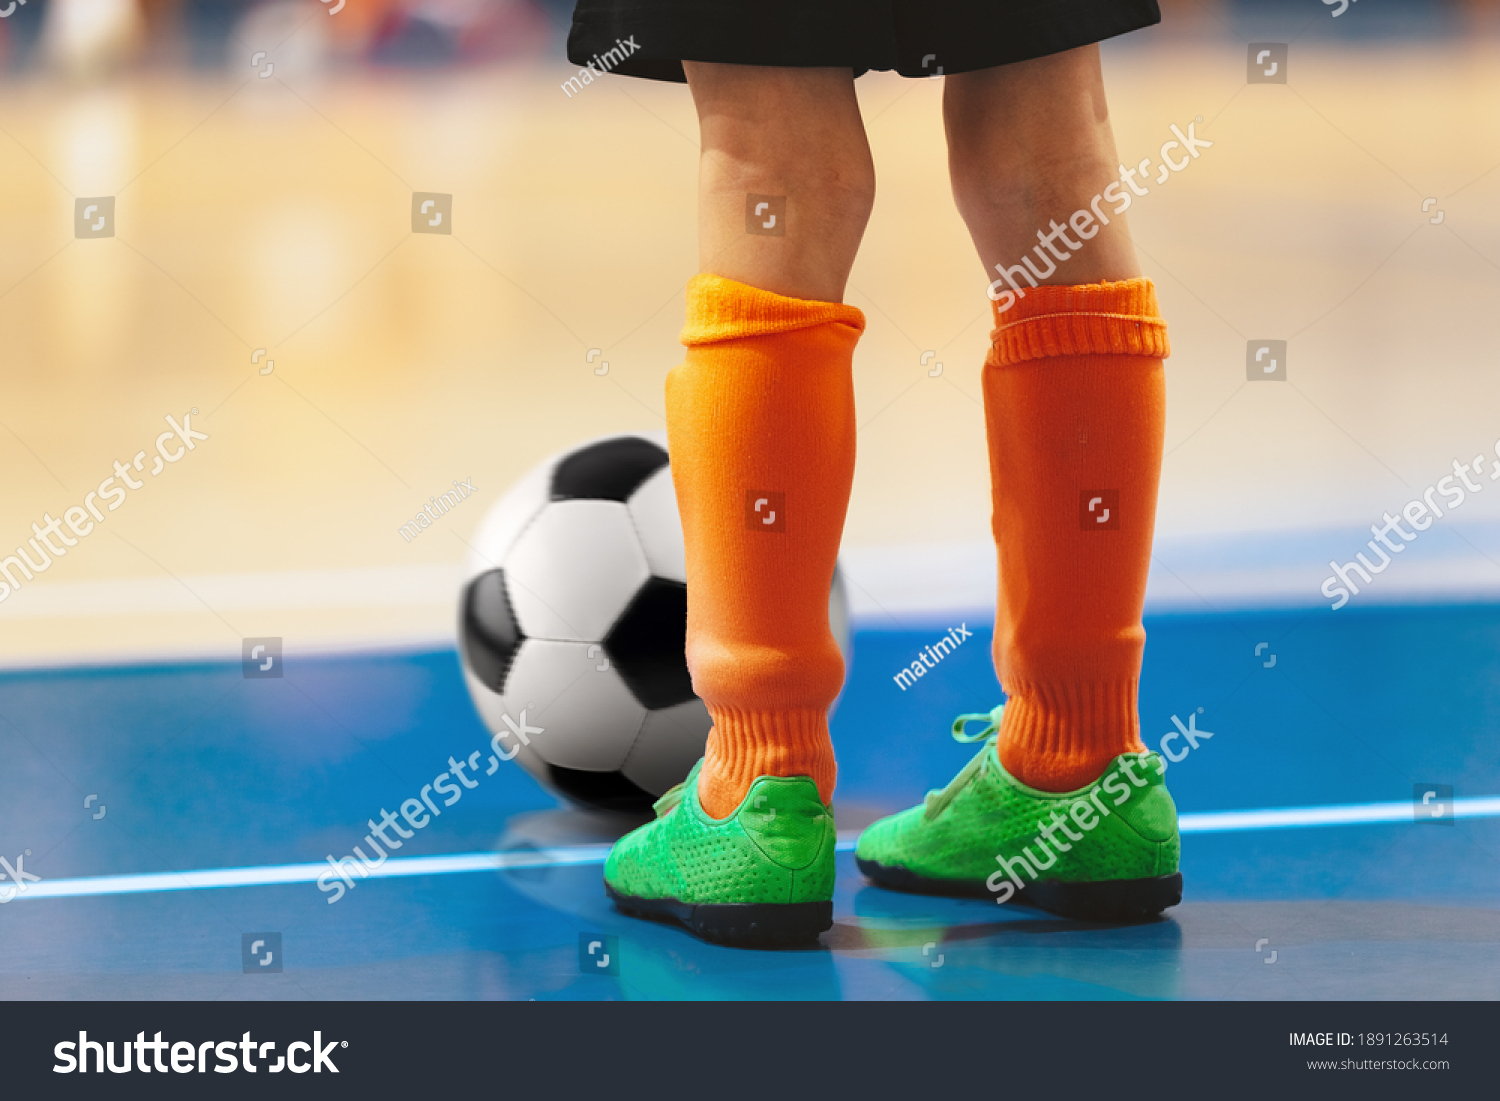 Futsal training for youth team. Young boy with soccer ball standing on white line. Indoor football soccer school practice. Kid in sportswear, black shorts, soccer cleats and orange socks #1891263514